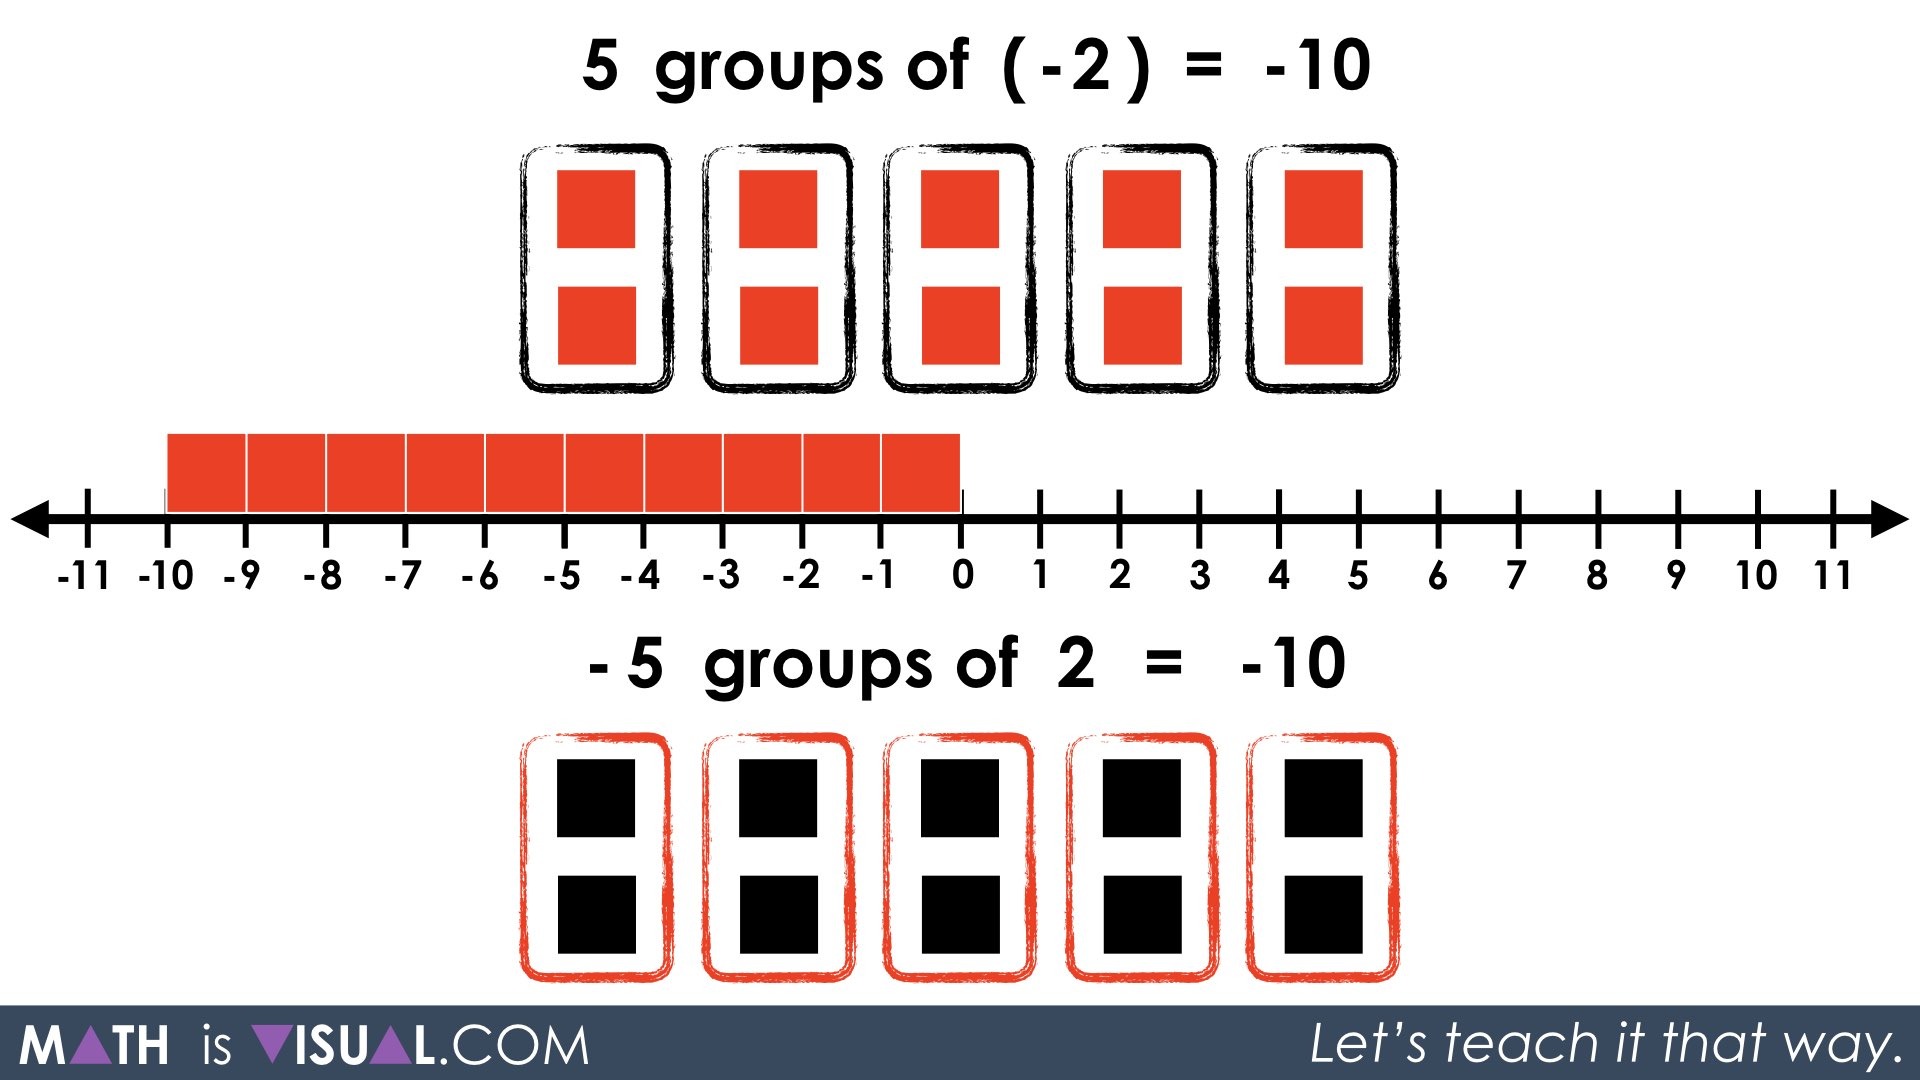 Int multiply. Multiplying integers and Decimals by 0.1 and 0.01.